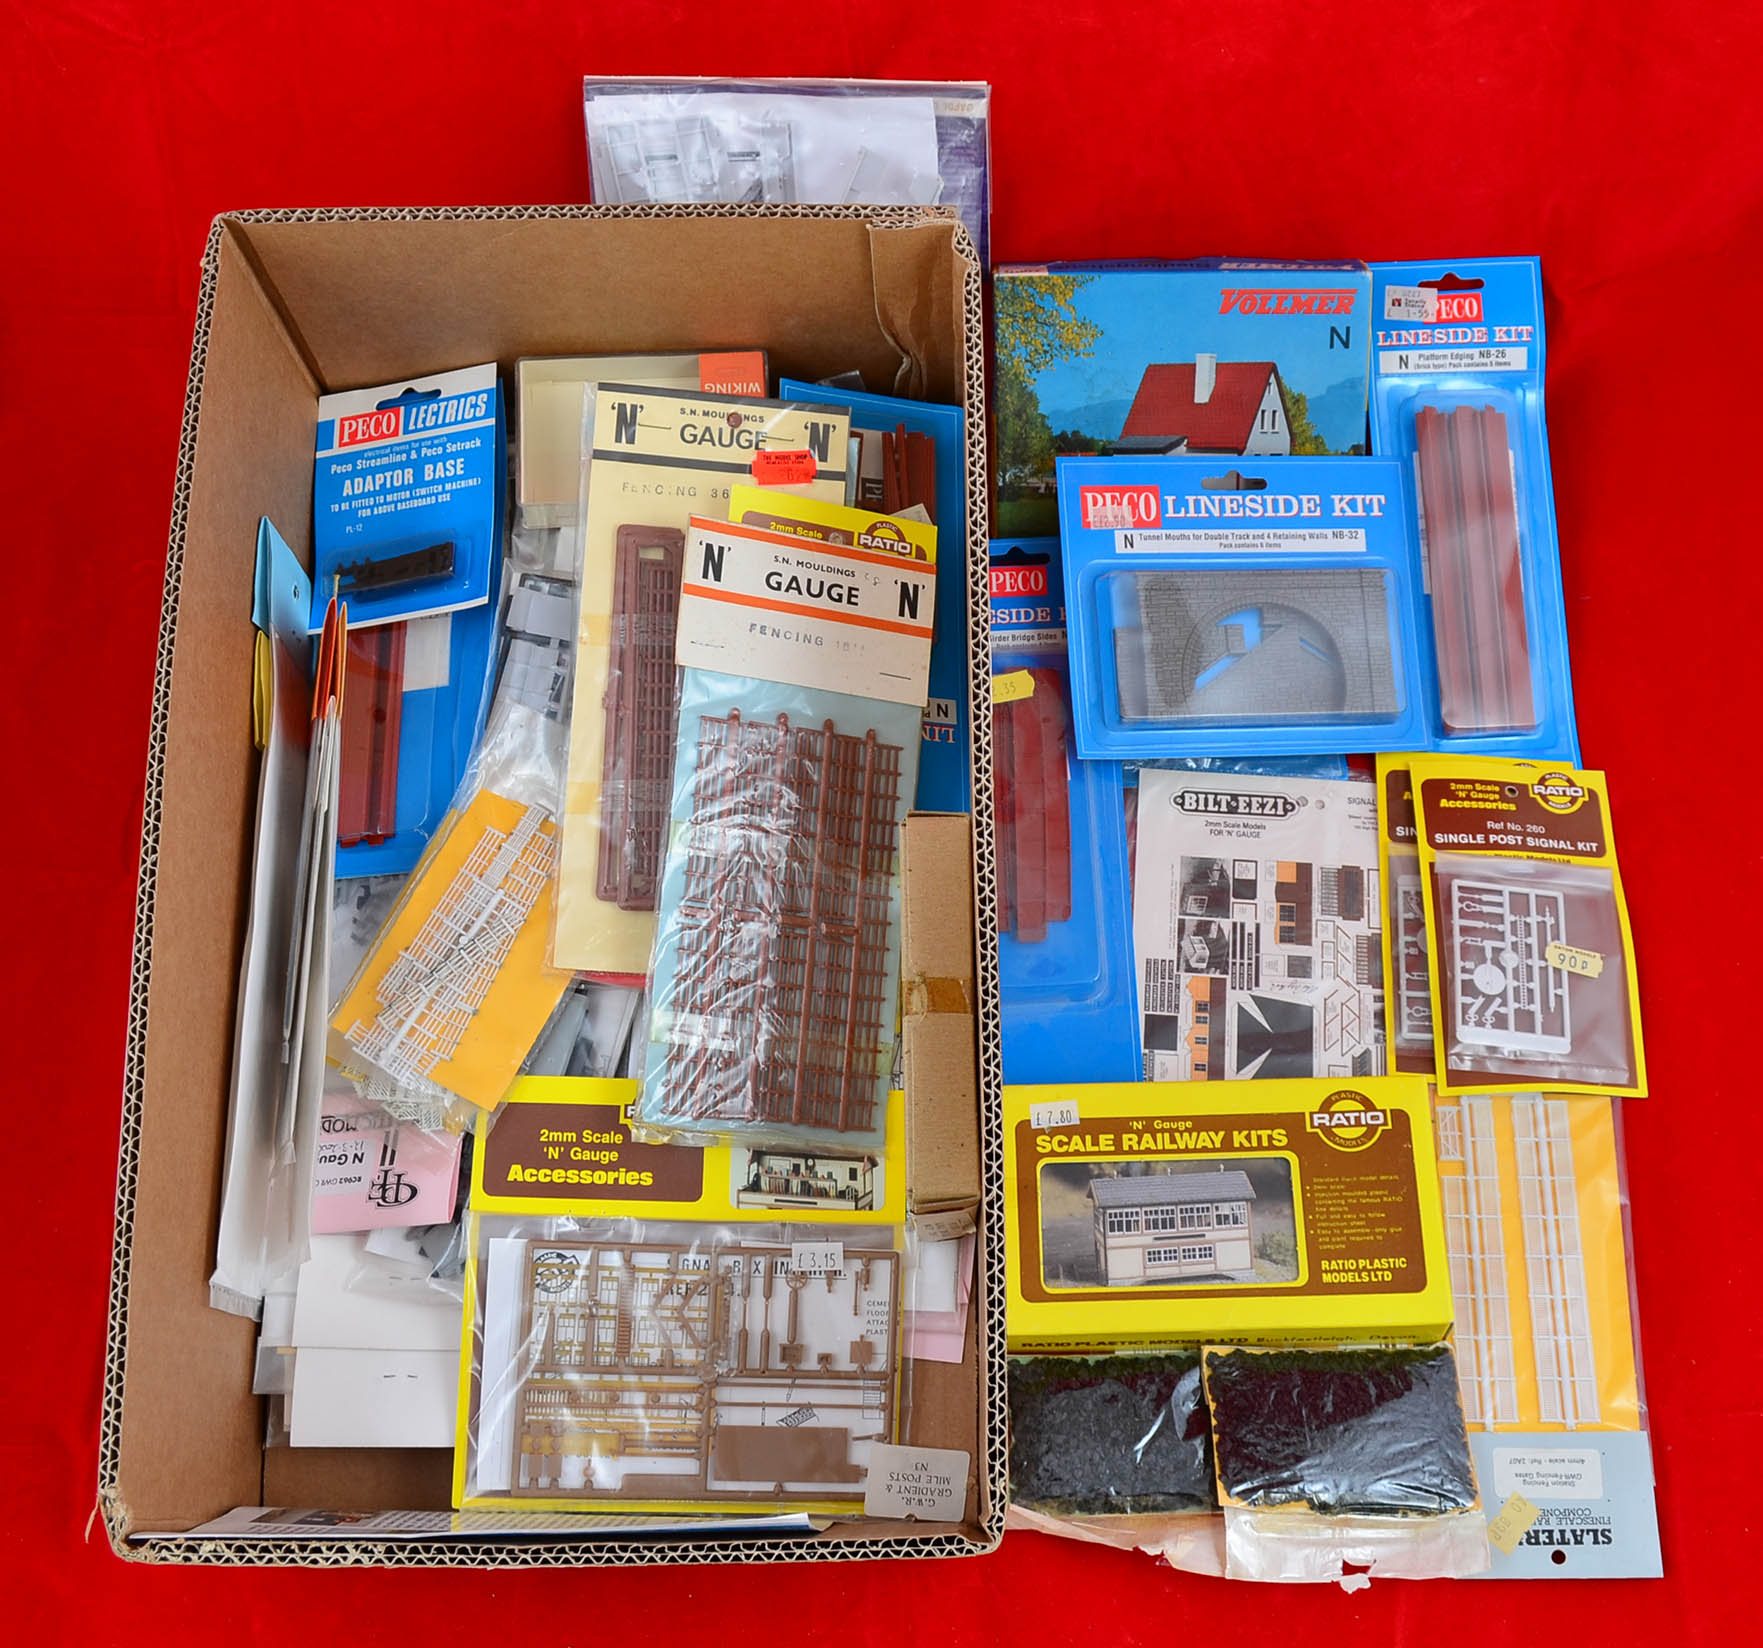 N gauge, quantity of kits and accessories.